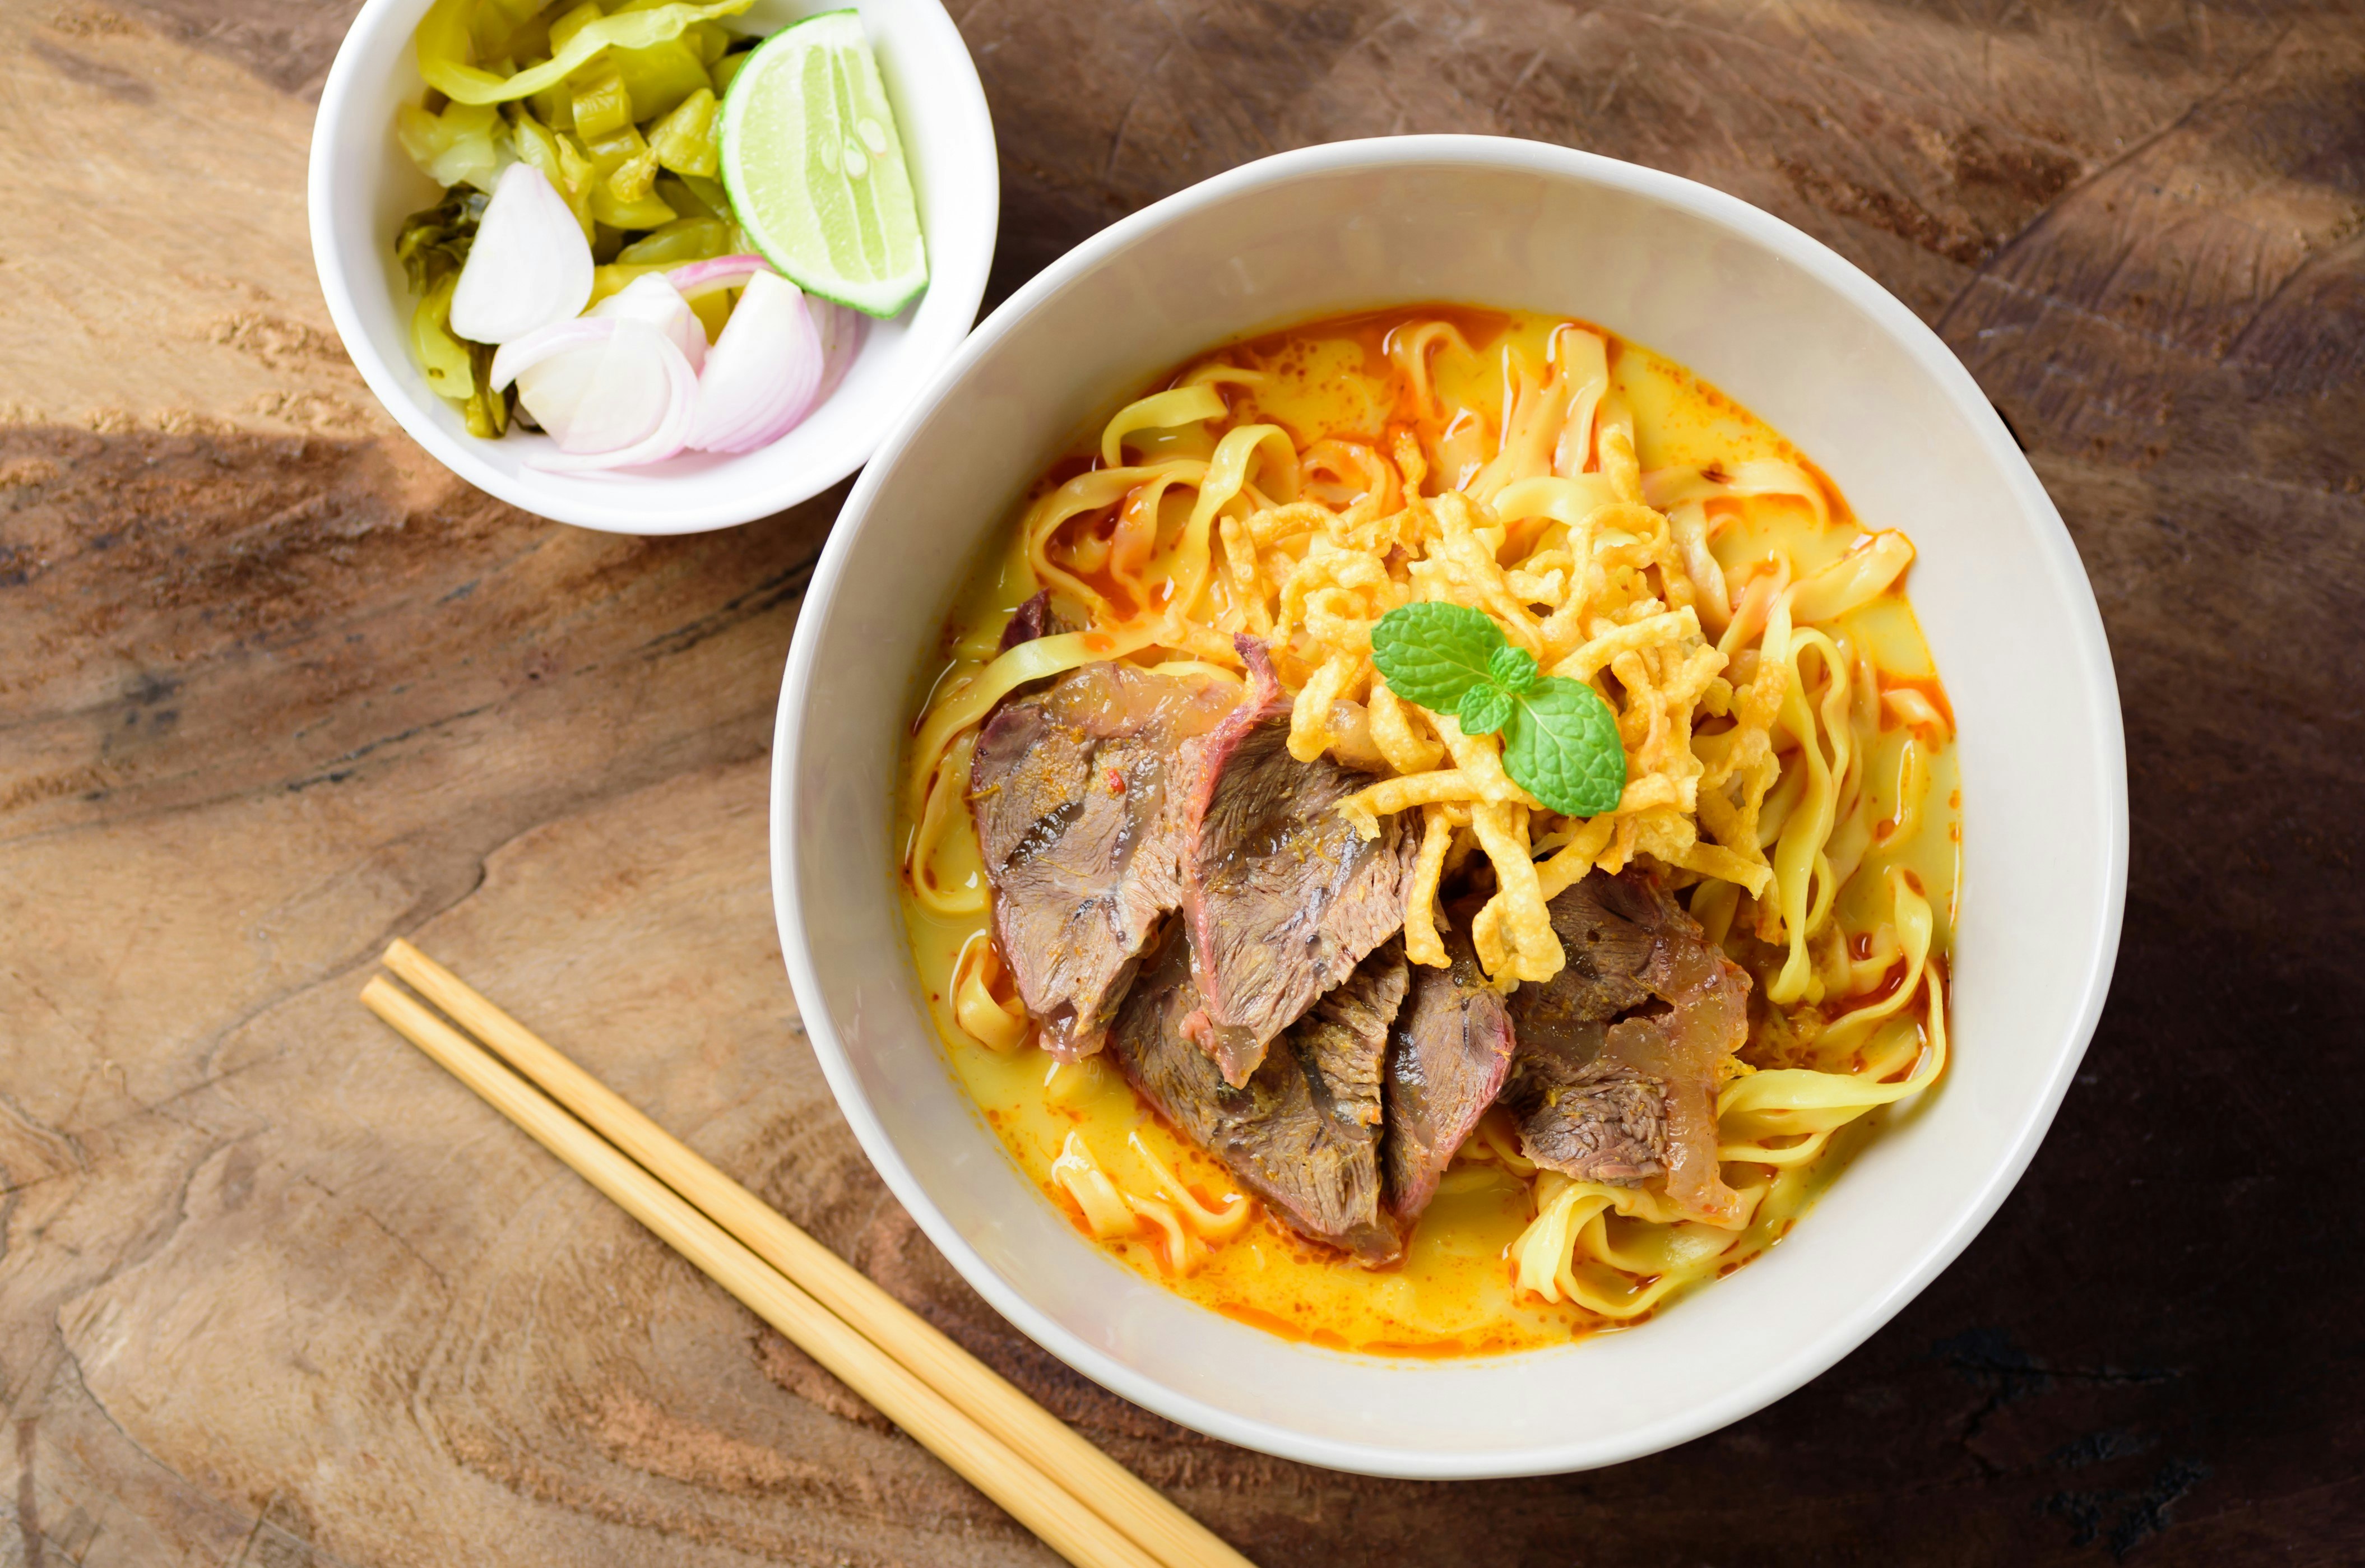 A top-down view of a bowl of khao soi sitting on a tabletop. Khao soi is a noodle soup with meat and vegetables with a creamy, yellowish broth.